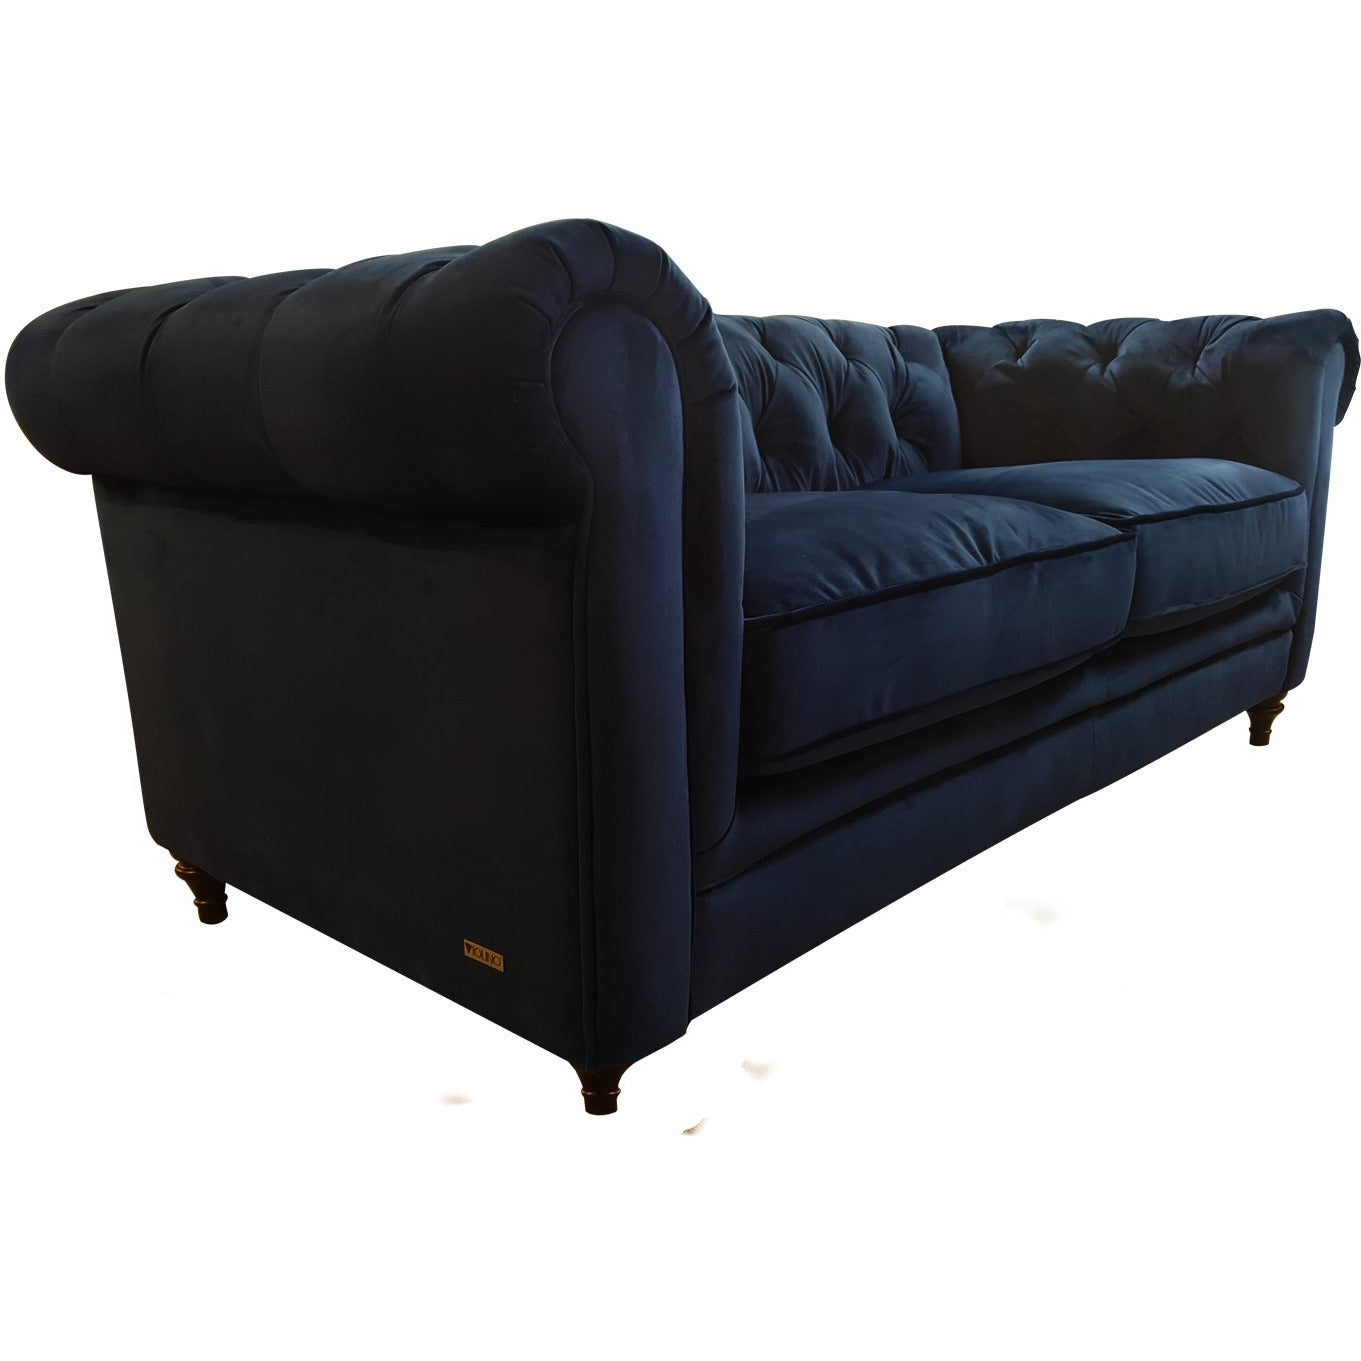 Chesterfield 3 Seater Velvet Sofa from Upstairs Downstairs Furniture in Lisburn, Monaghan and Enniskillen